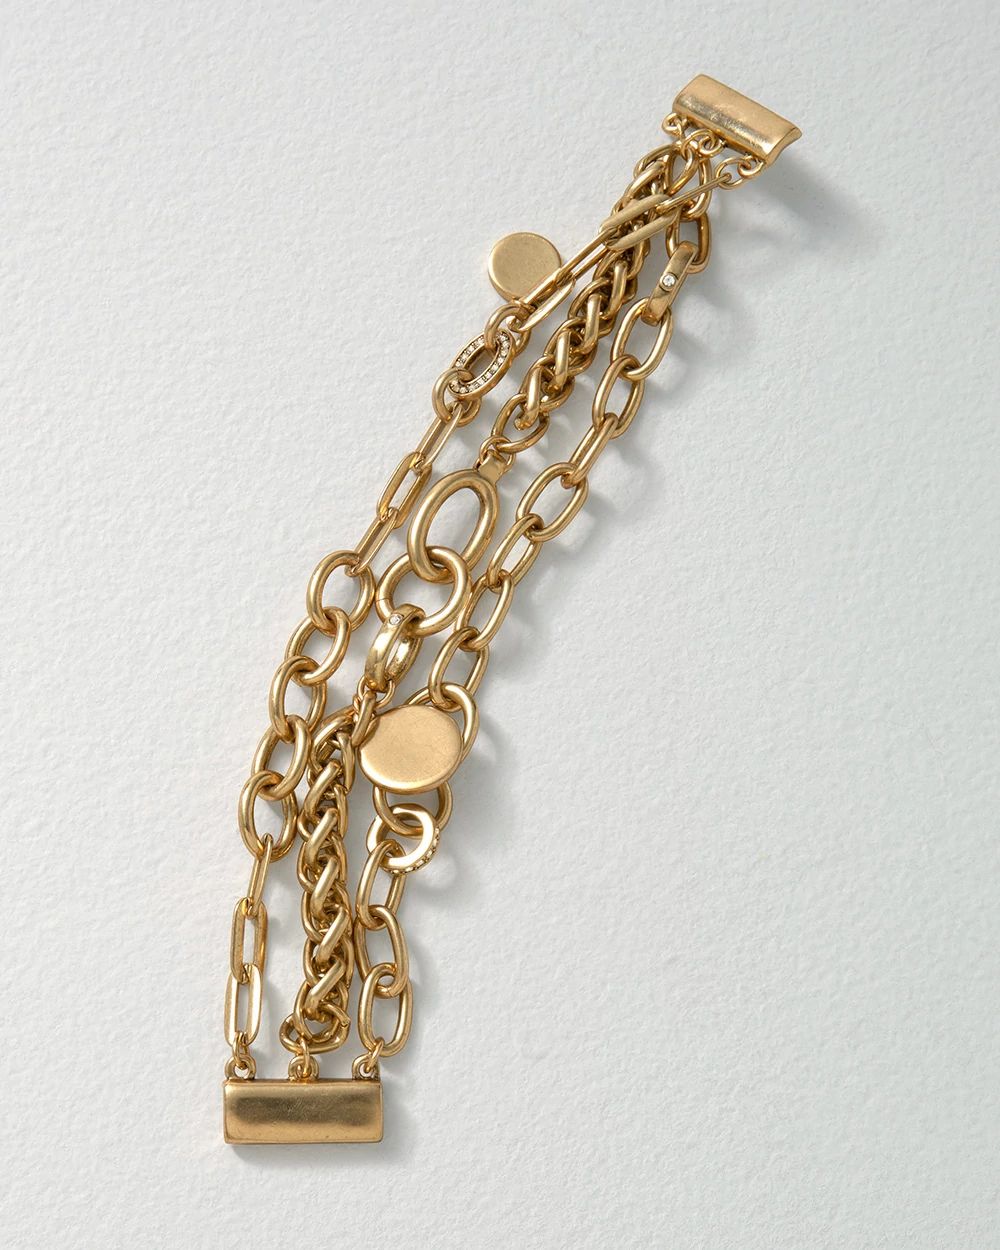 Goldtone Chain Magnetic Bracelet click to view larger image.